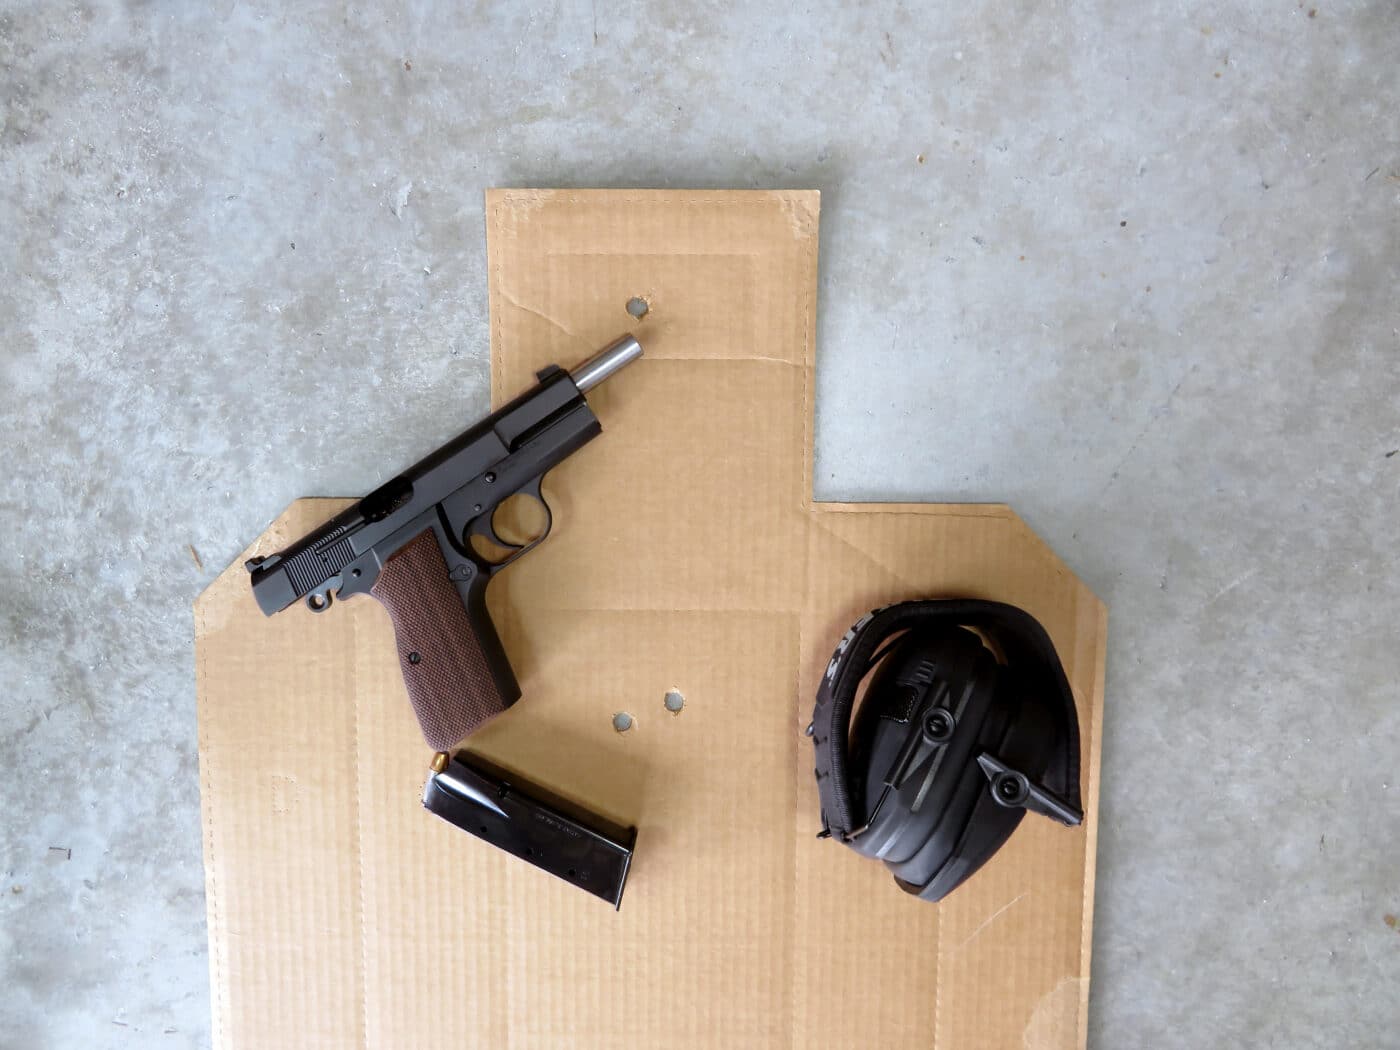 Pistol with magazine and ear protection on top of cardboard shooting target